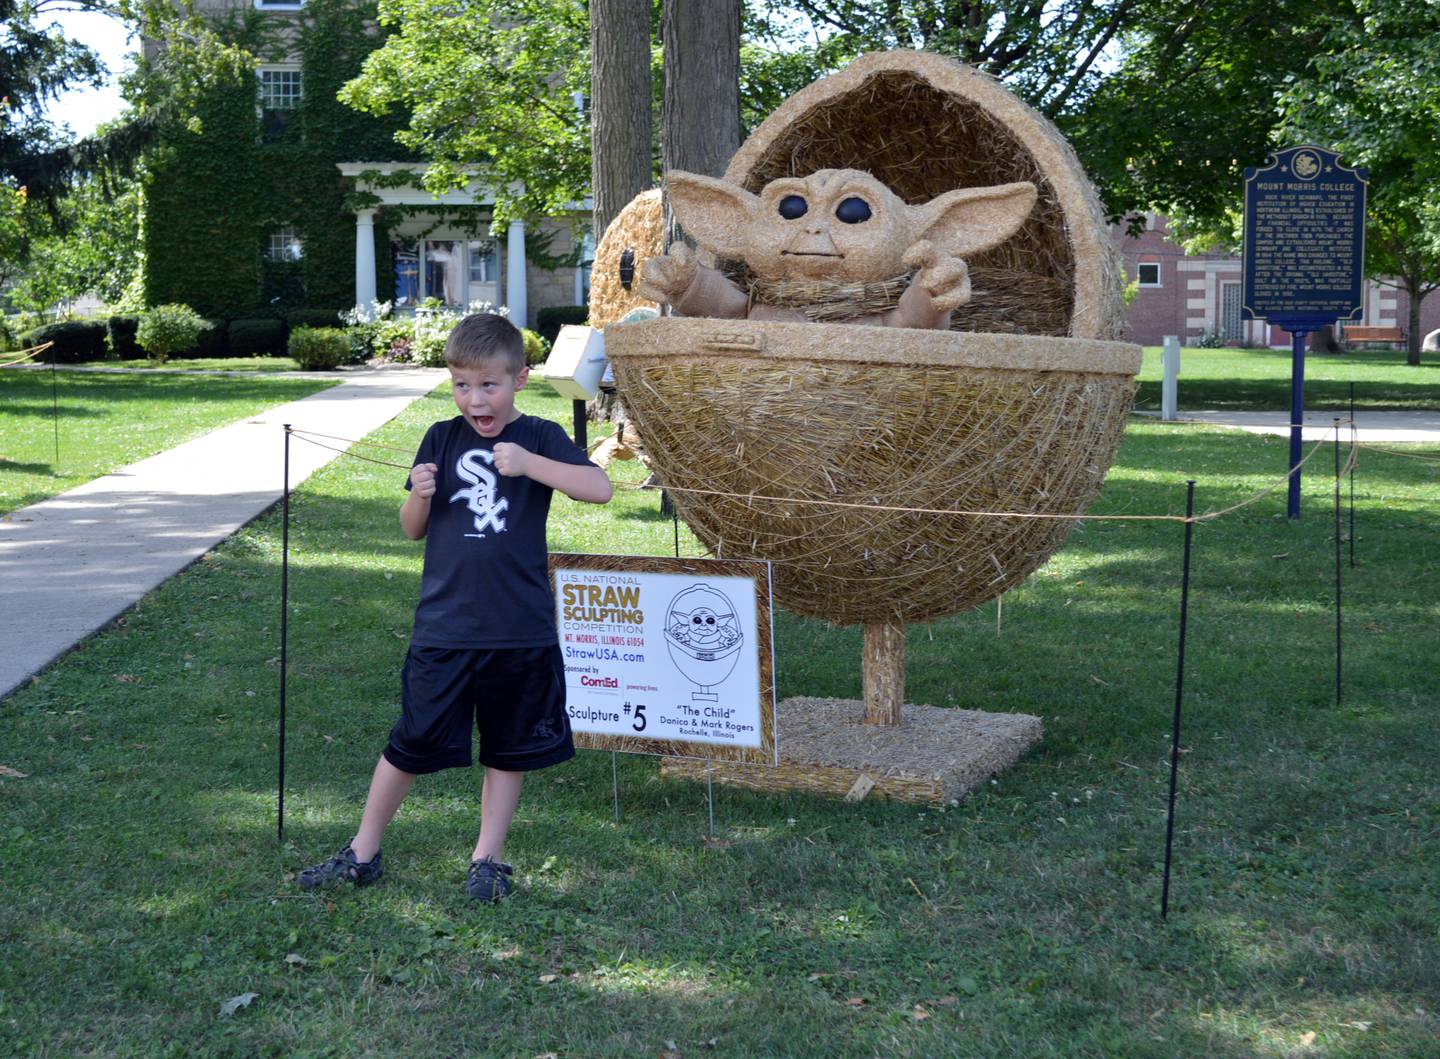 Michael Swanson, 7, of Byron, poses in front of "The Child" in Mt. Morris on Aug. 14, 2021. The straw sculpture of Star Wars' baby Yoda was made by Danica and Mark Rogers of Rochelle as an entry in the U.S. National Straw Sculpting Competition. The competition runs Aug. 13-29 with sculptures displayed on the campus in Mt. Morris. The public can vote for their favorite through Aug. 28.